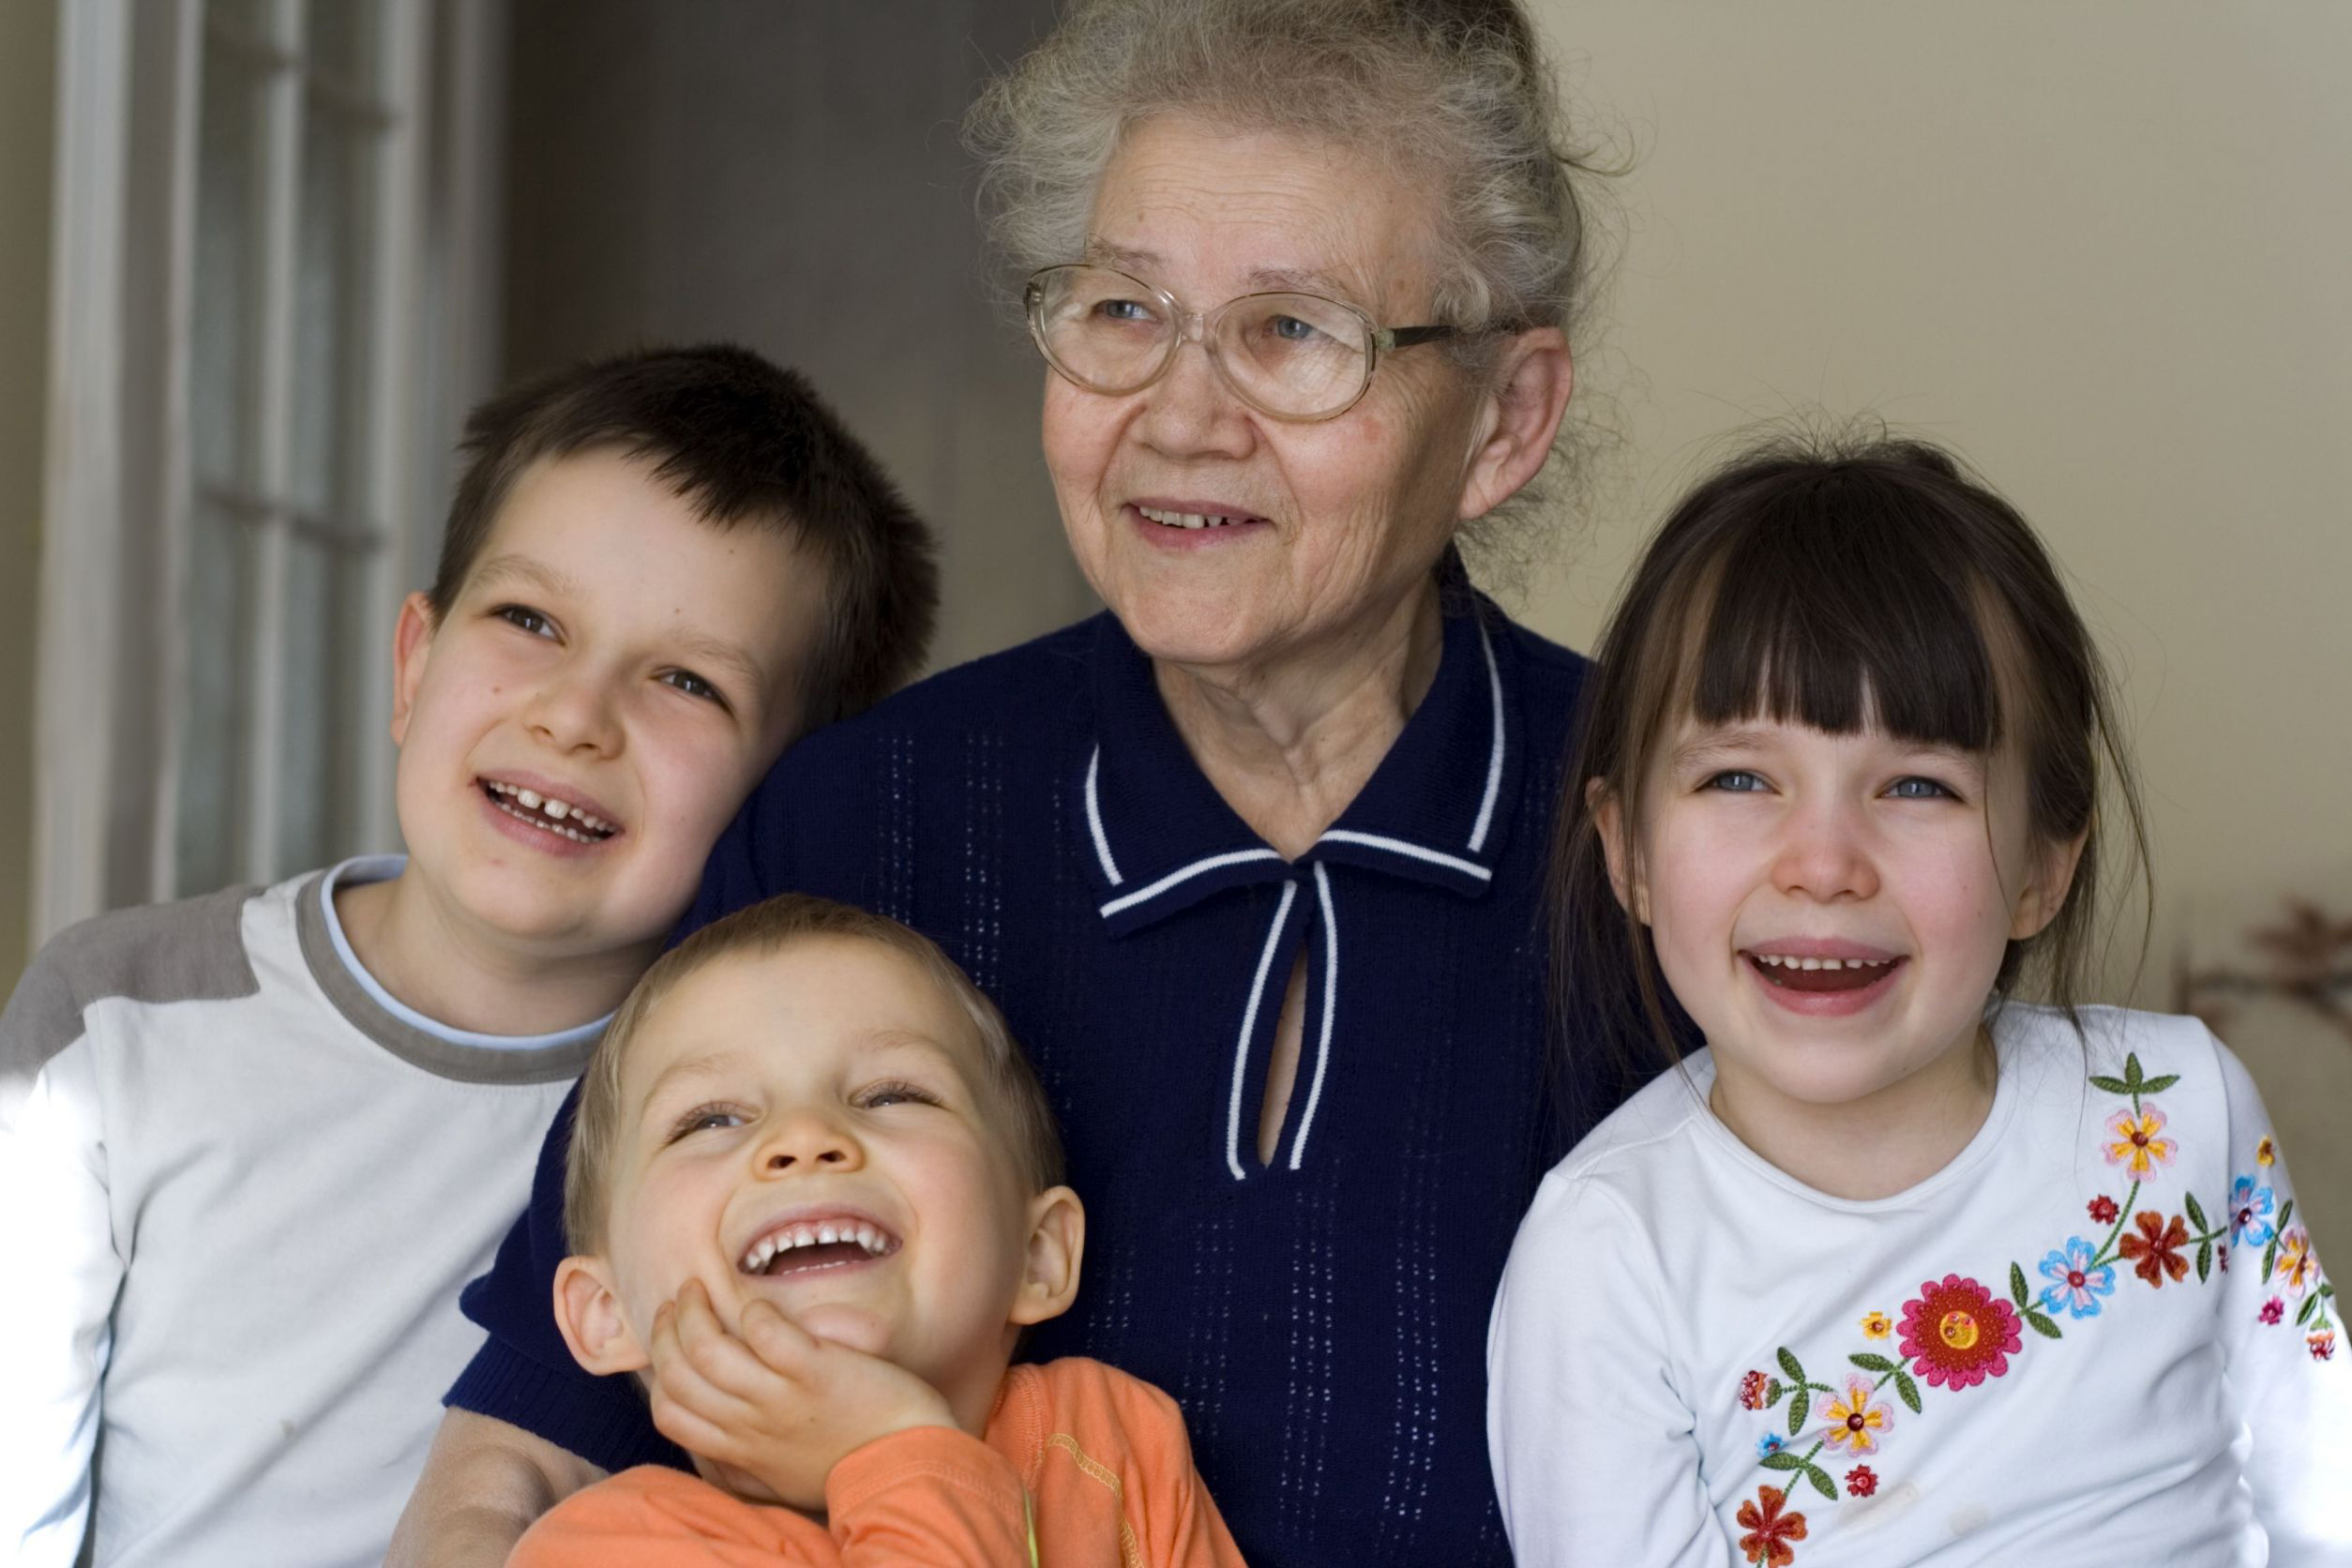 Grandmother with grandchildren laughing